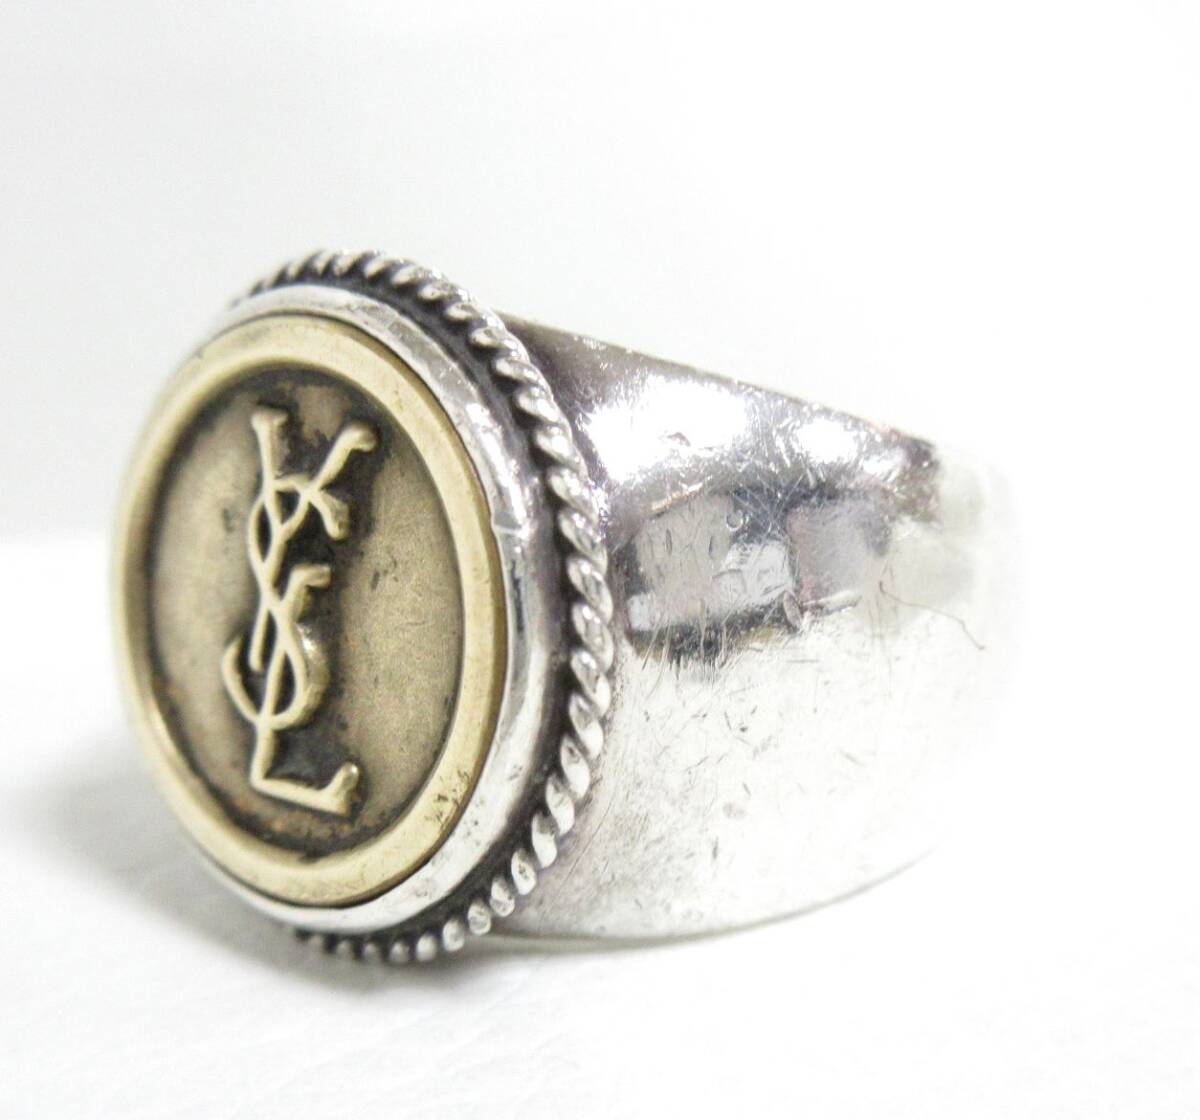 12760◆Button Works x Larry Smith YSL Vintage Button Ring ラリースミス ボタンワークス リング/指輪 925【約17号】 中古 USEDの画像6